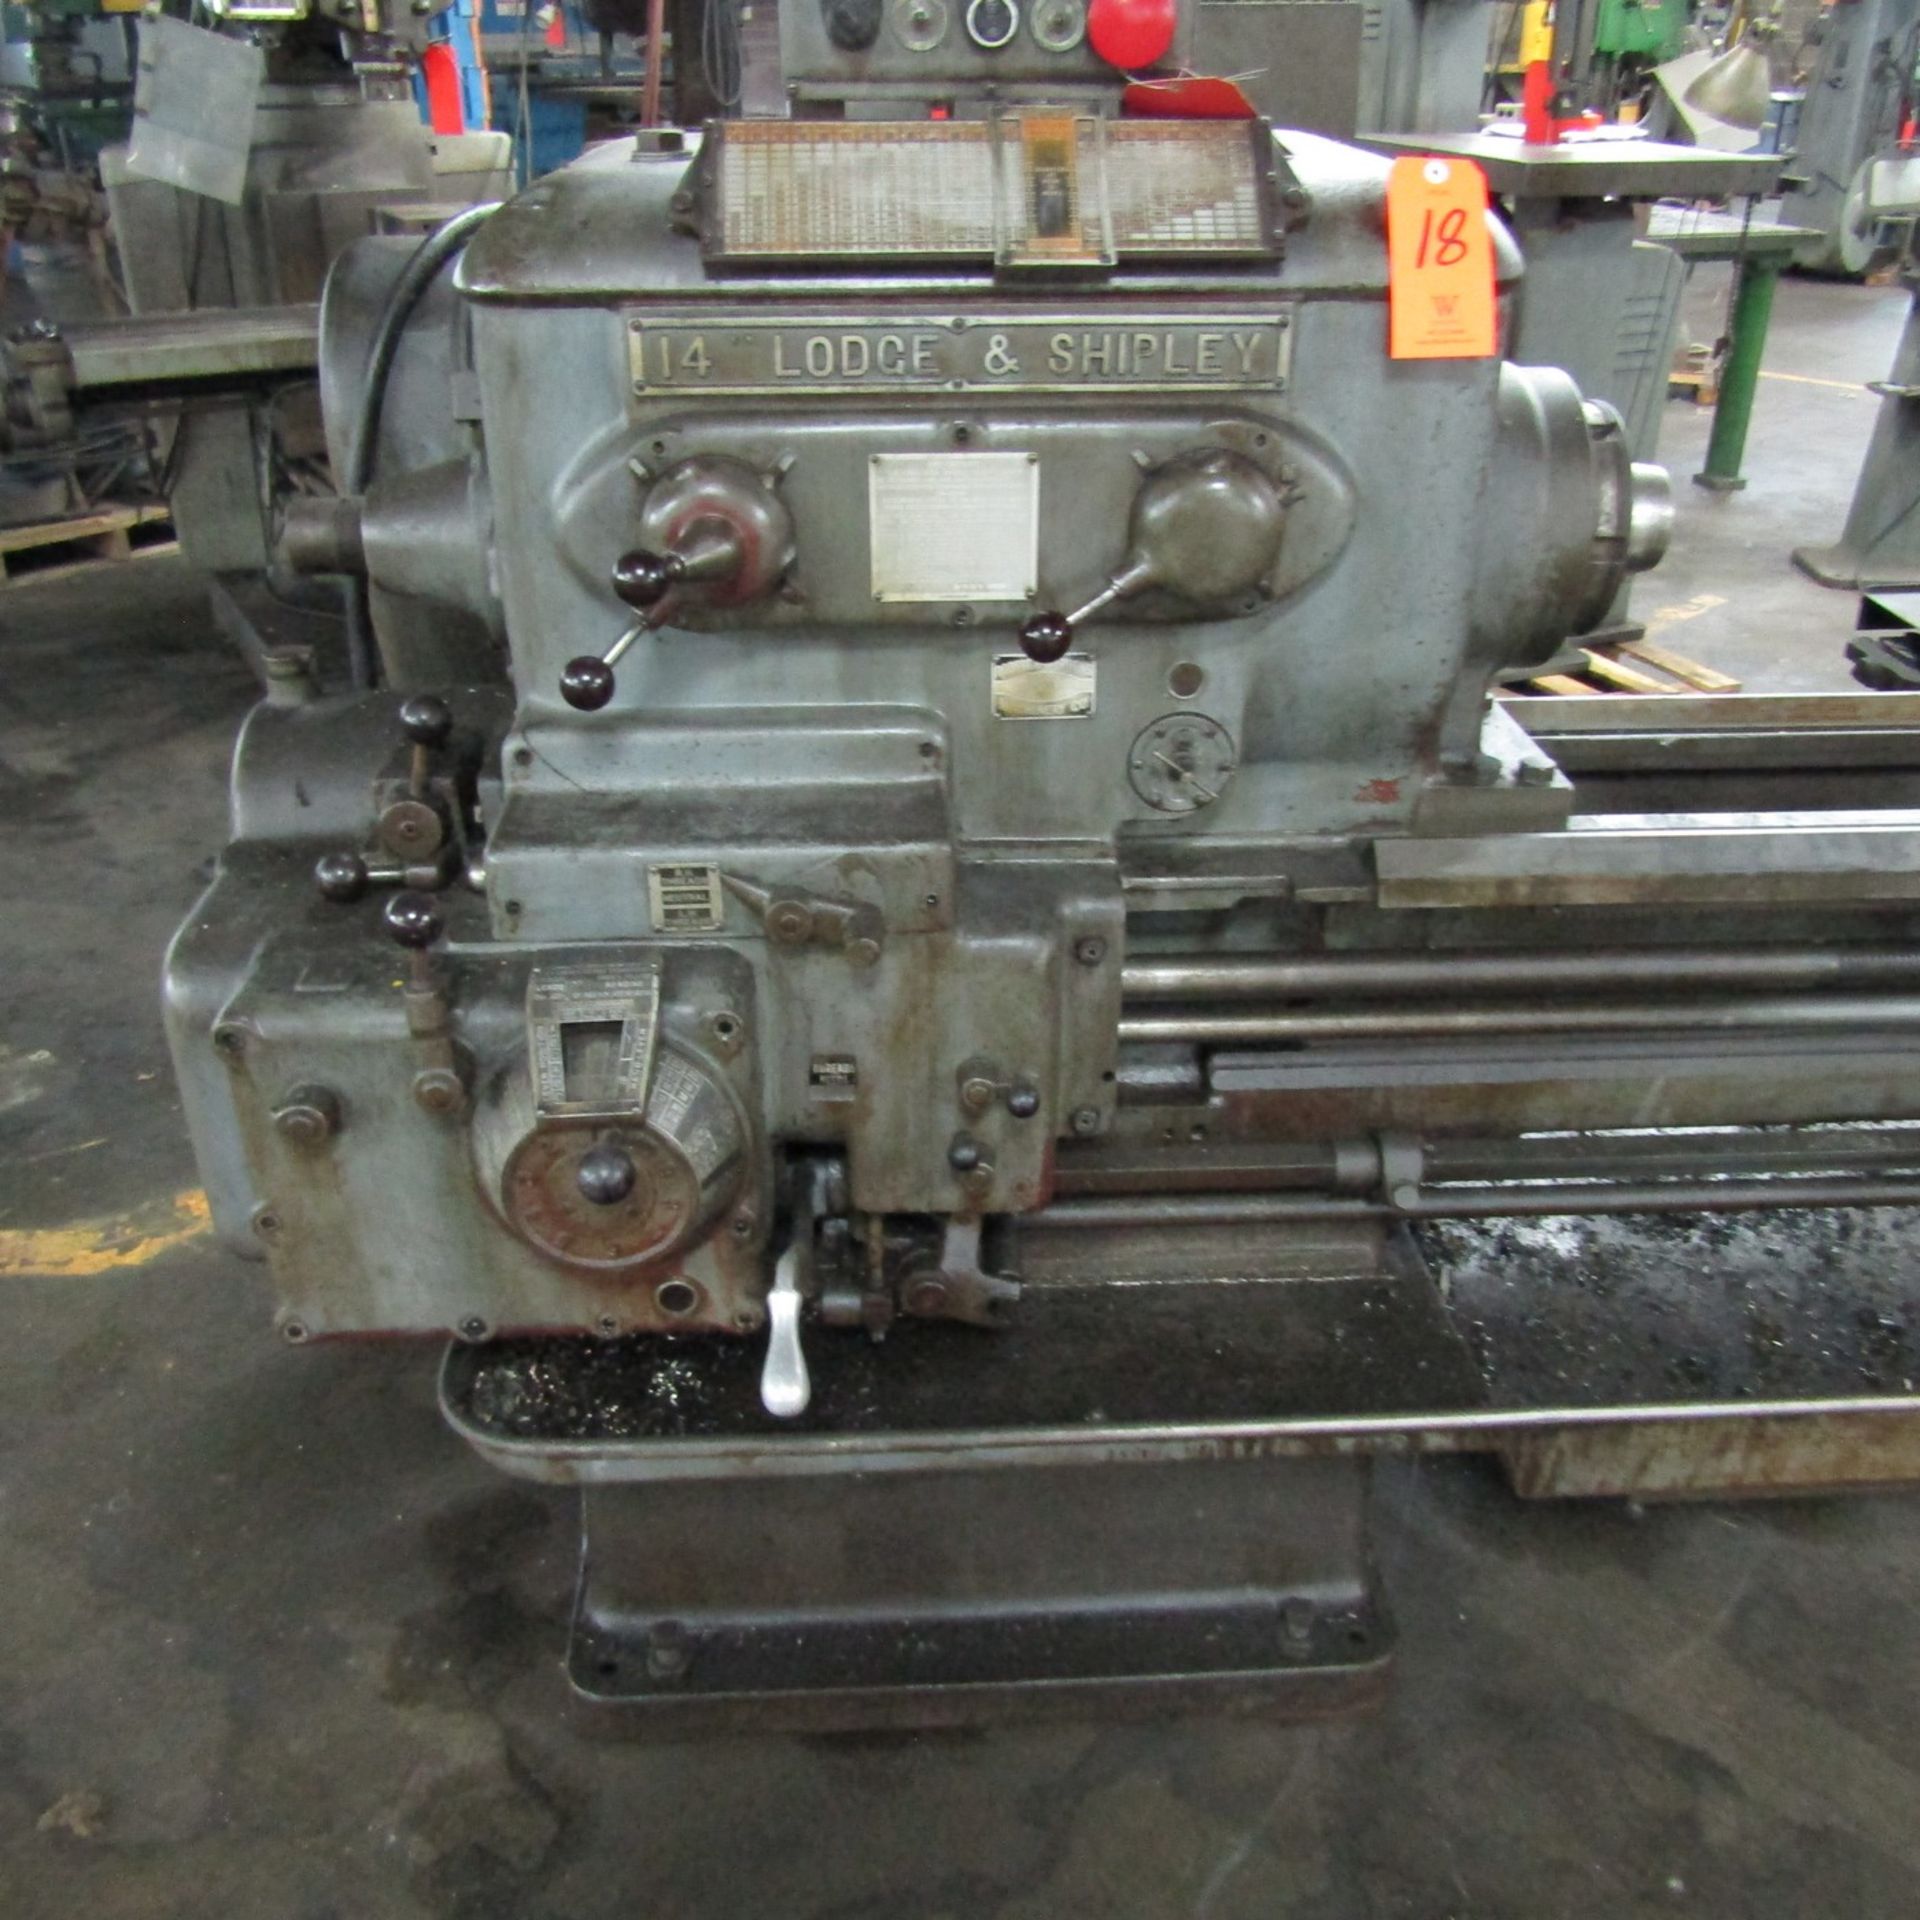 Lodge & Shipley 14 in. Geared Head Engine Lathe, S/N: 42897; 14 in. x 40 in. (approx.), Threading, - Image 2 of 5